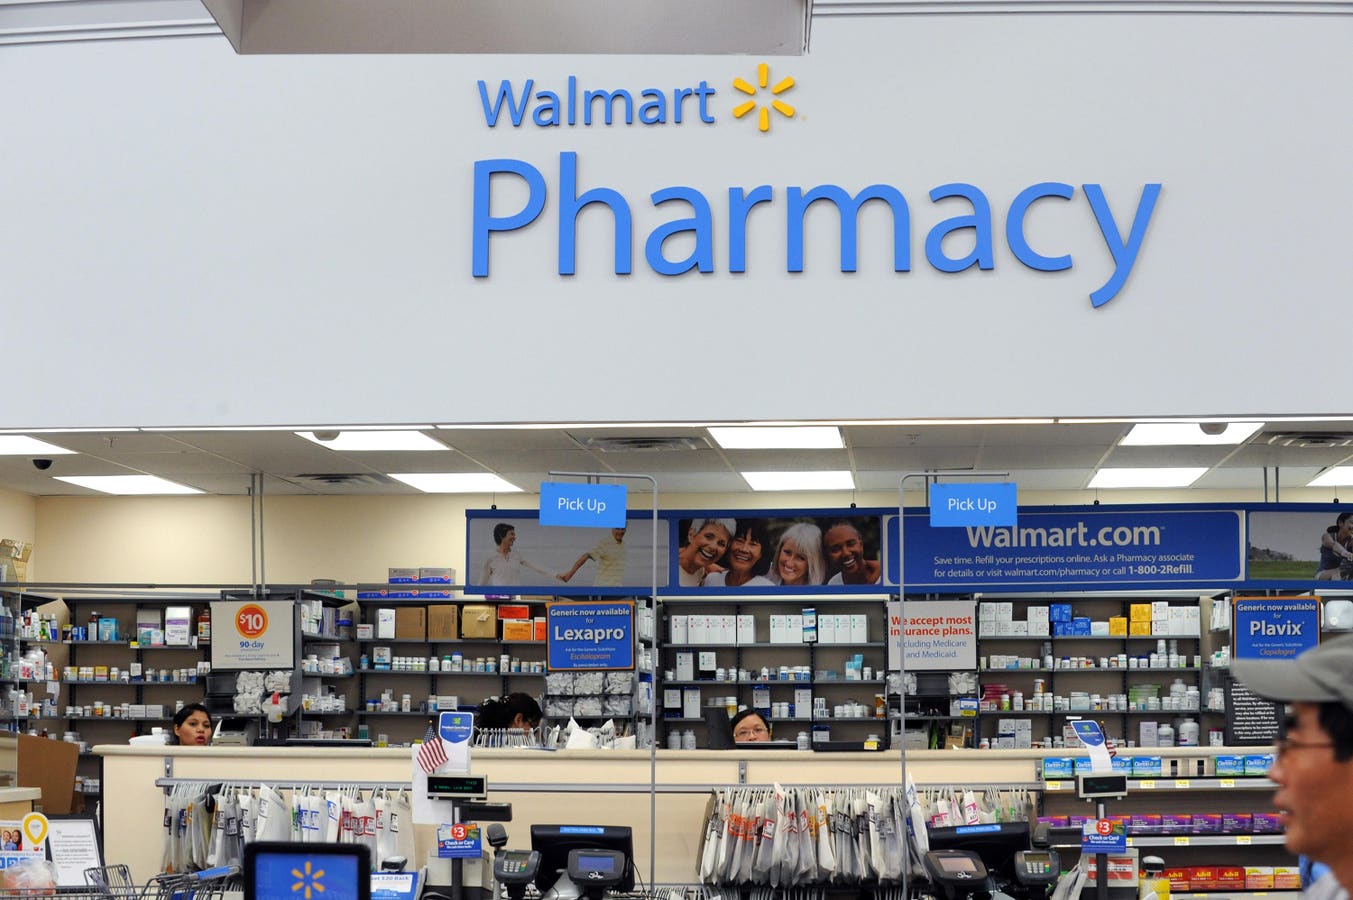 As their clinics sputter, Walgreens and Walmart are investing more in specialty pharmacies